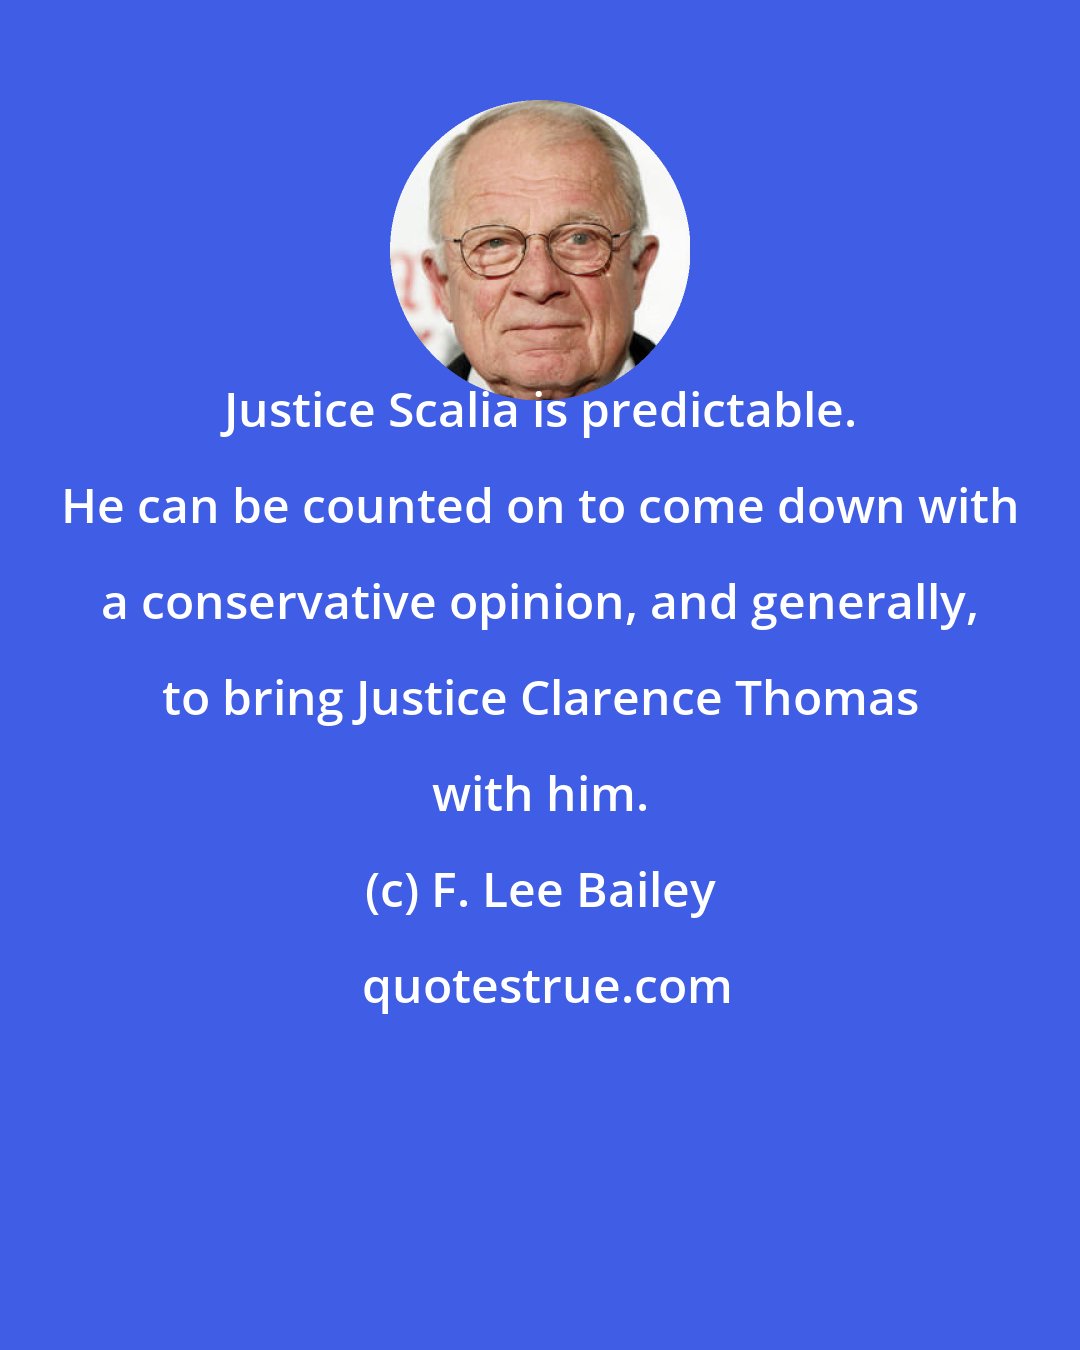 F. Lee Bailey: Justice Scalia is predictable. He can be counted on to come down with a conservative opinion, and generally, to bring Justice Clarence Thomas with him.